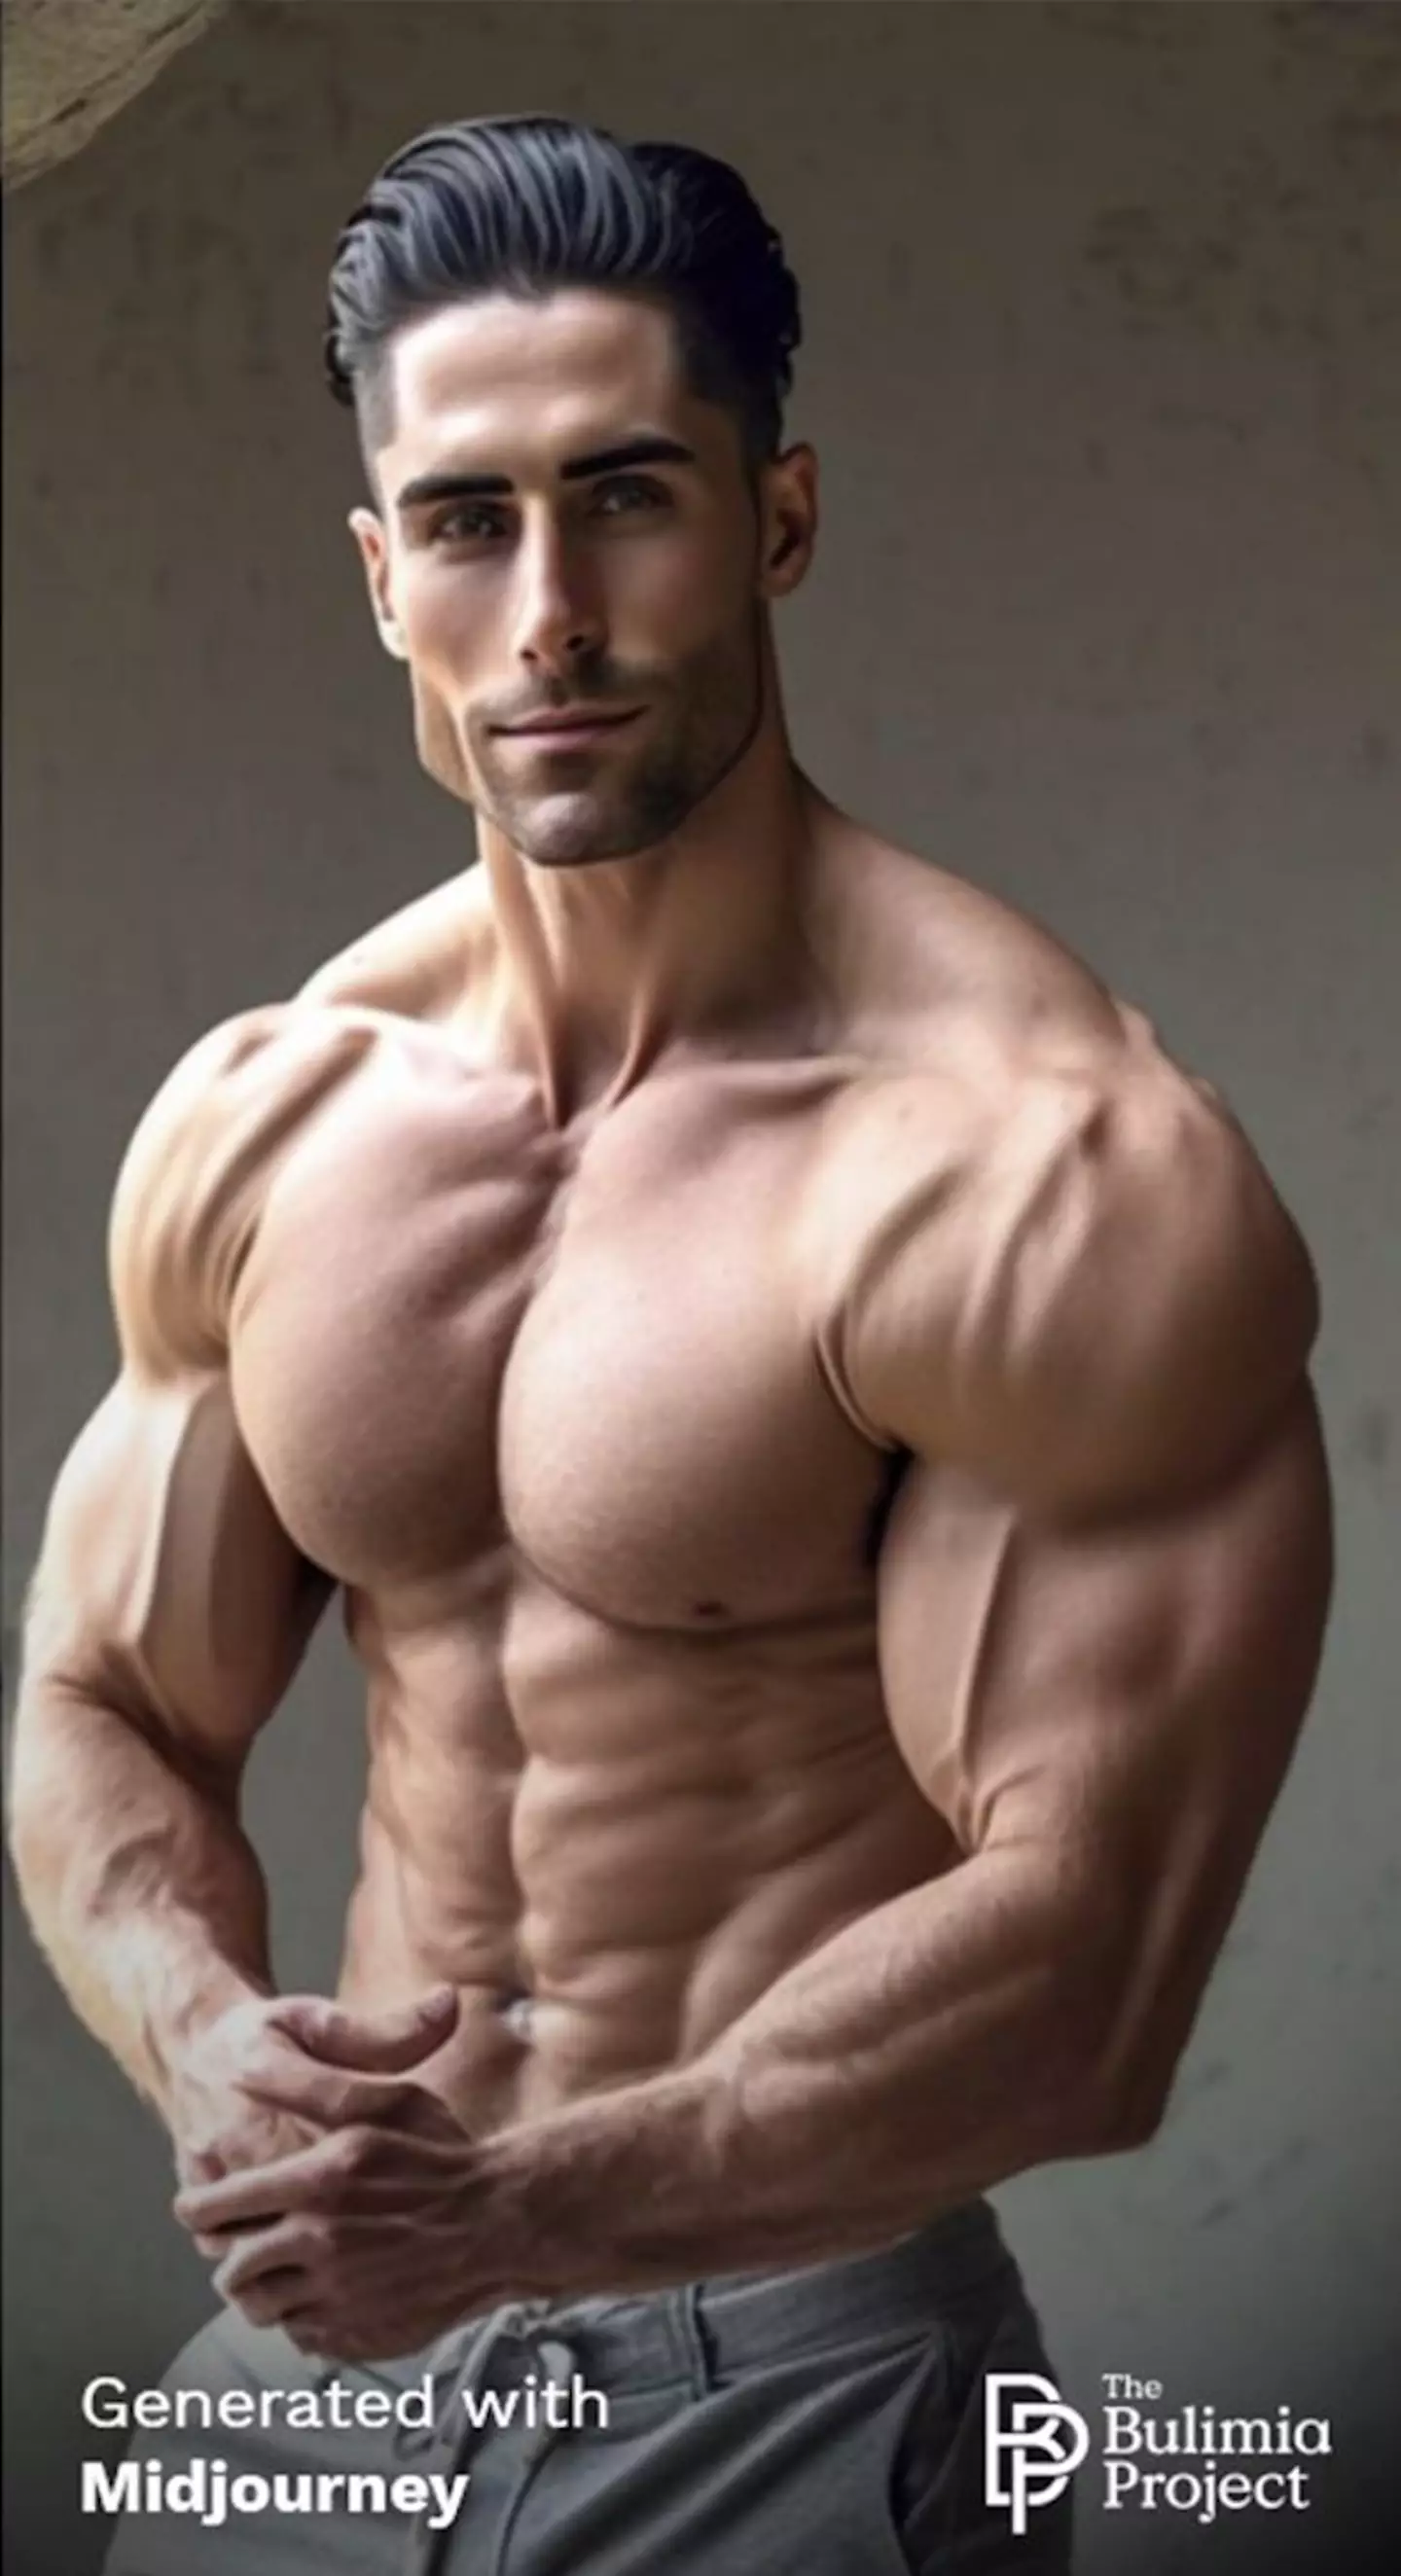 The image of the 'perfect' man has muscles and brown hair.